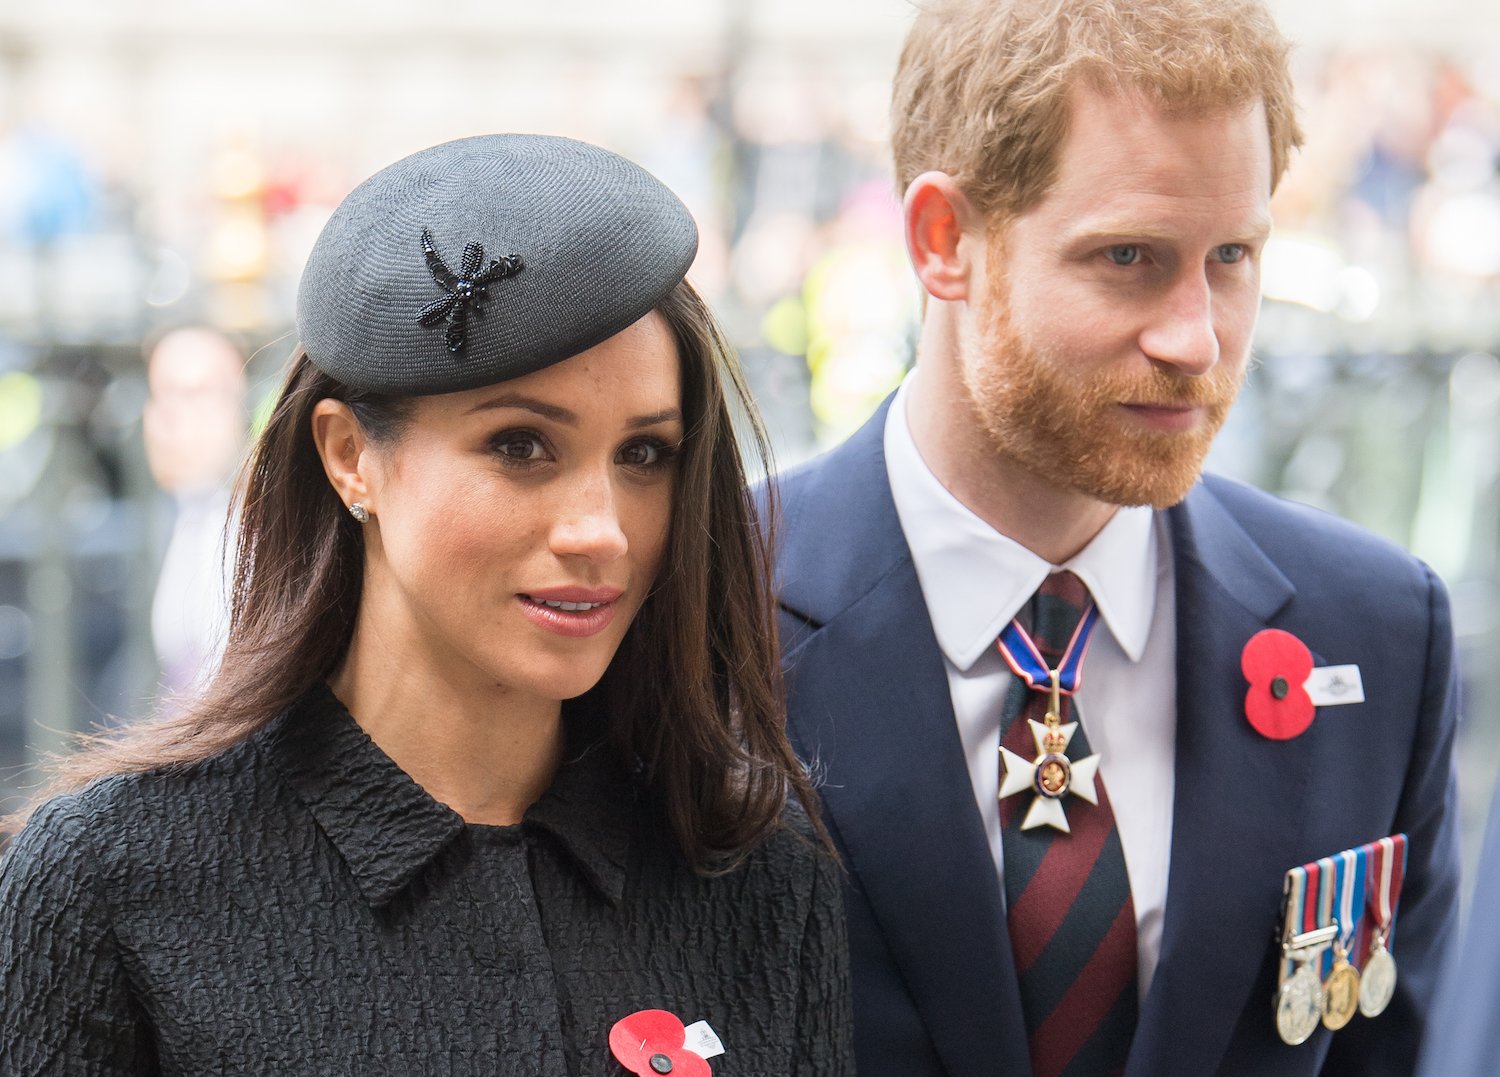 Prince Harry and Meghan Markle attend the Anzac Day service at Westminster Abbey on April 25, 2018 in London, England